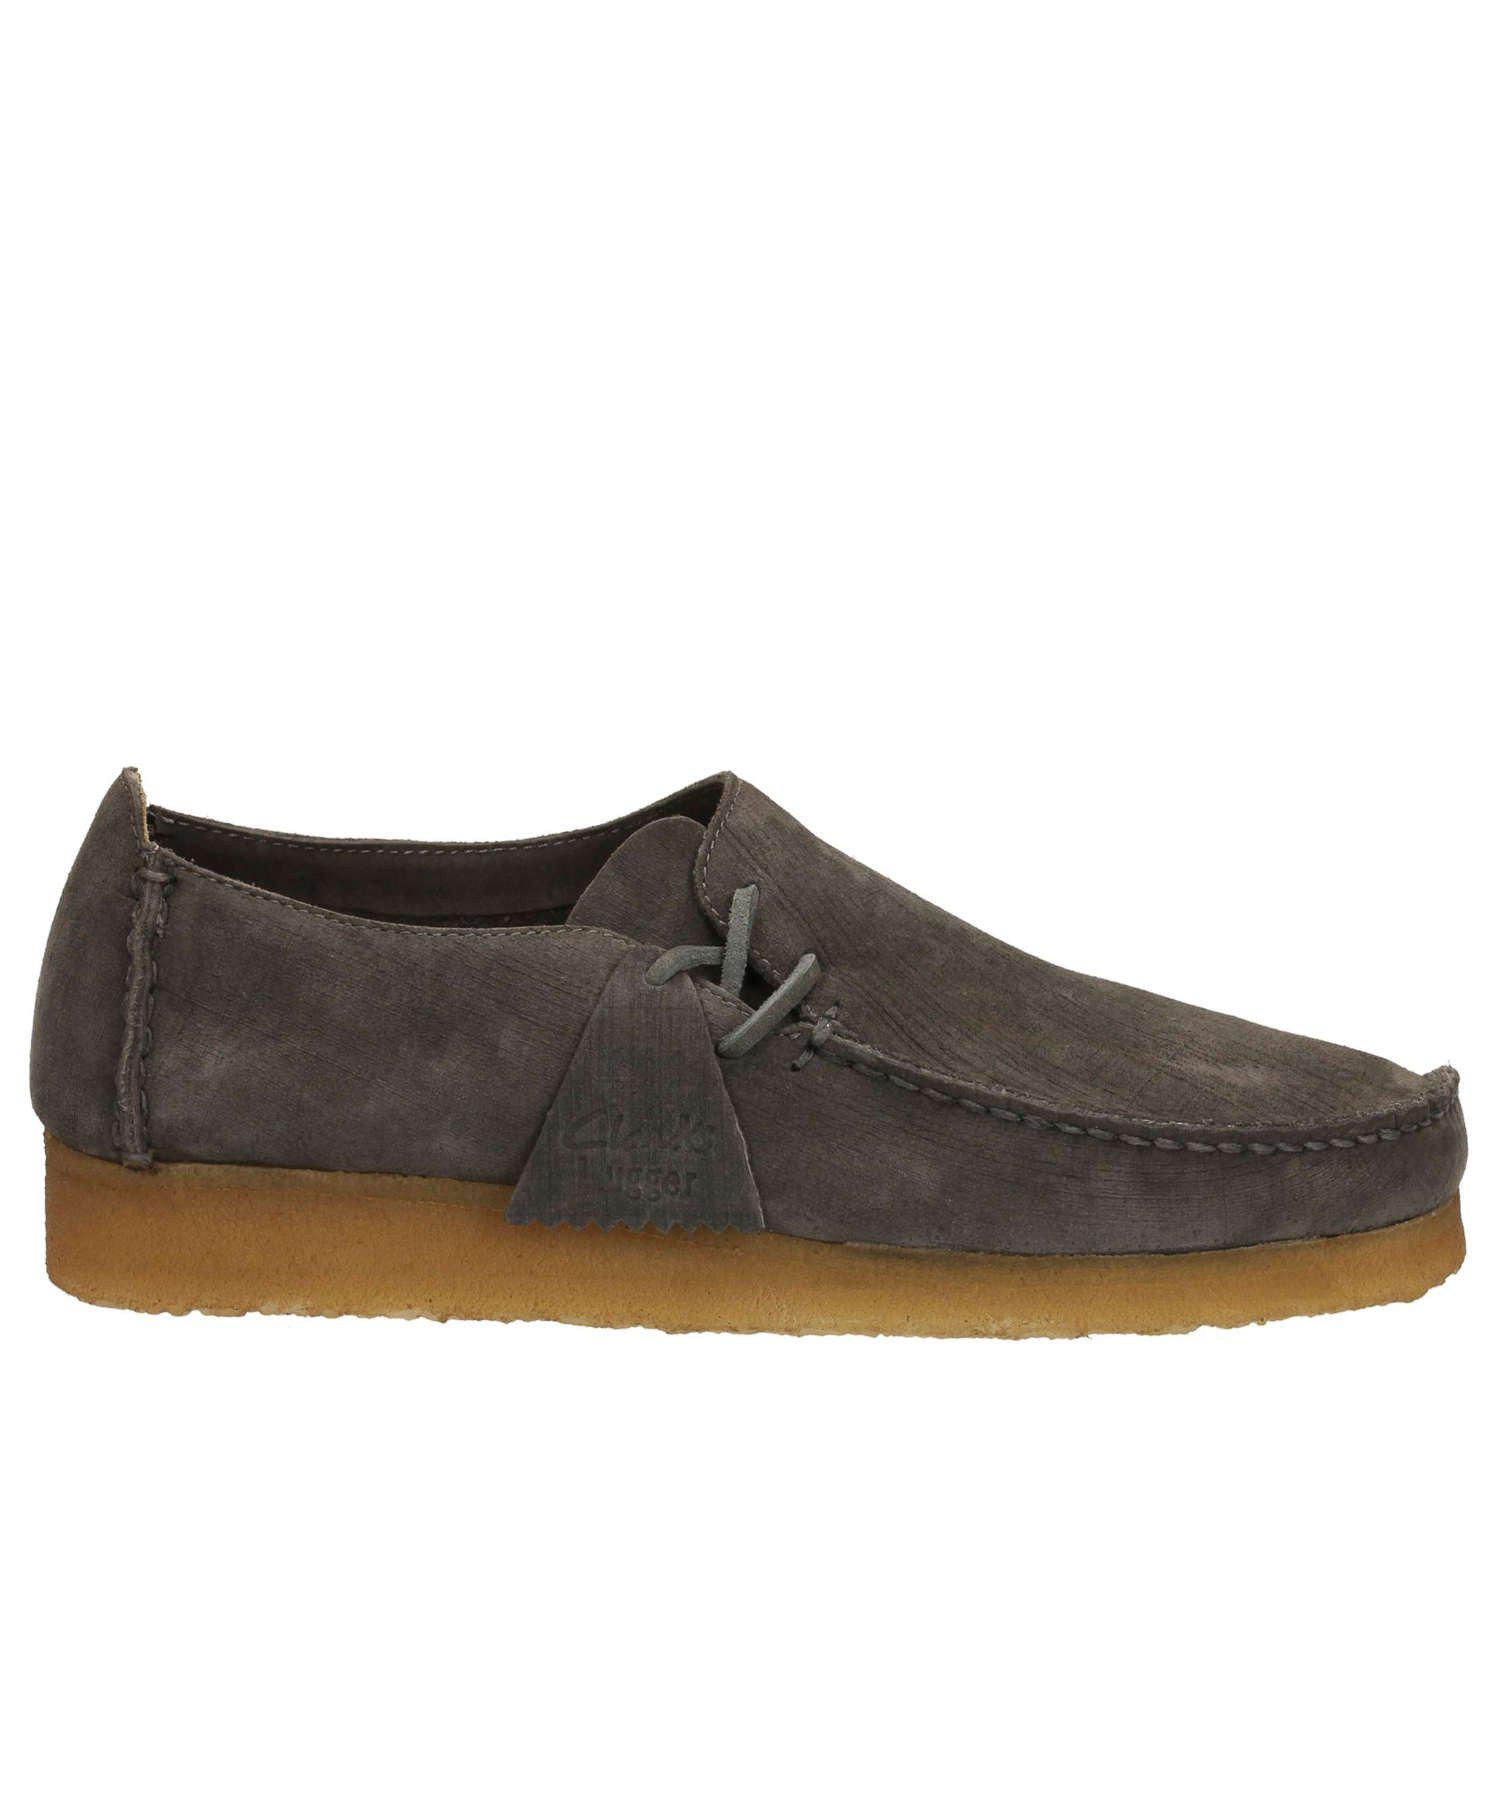 Clarks Leather Lugger Shoe In Charcoal in for Men -